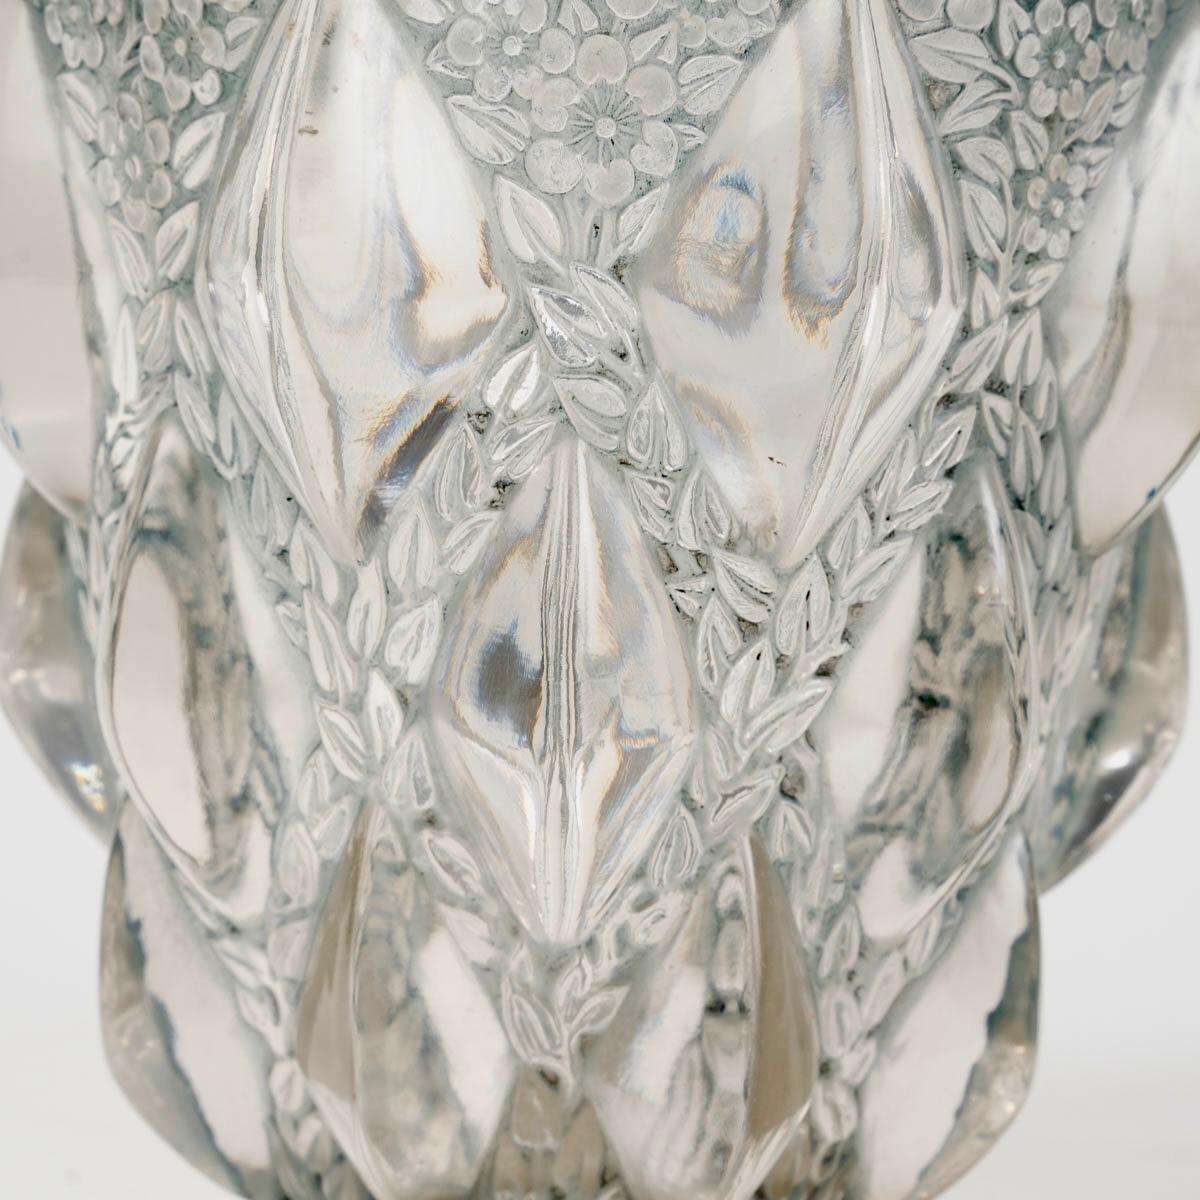 1927 René Lalique Vase Rampillon Frosted Glass with Blue-Grey Patina In Good Condition For Sale In Boulogne Billancourt, FR